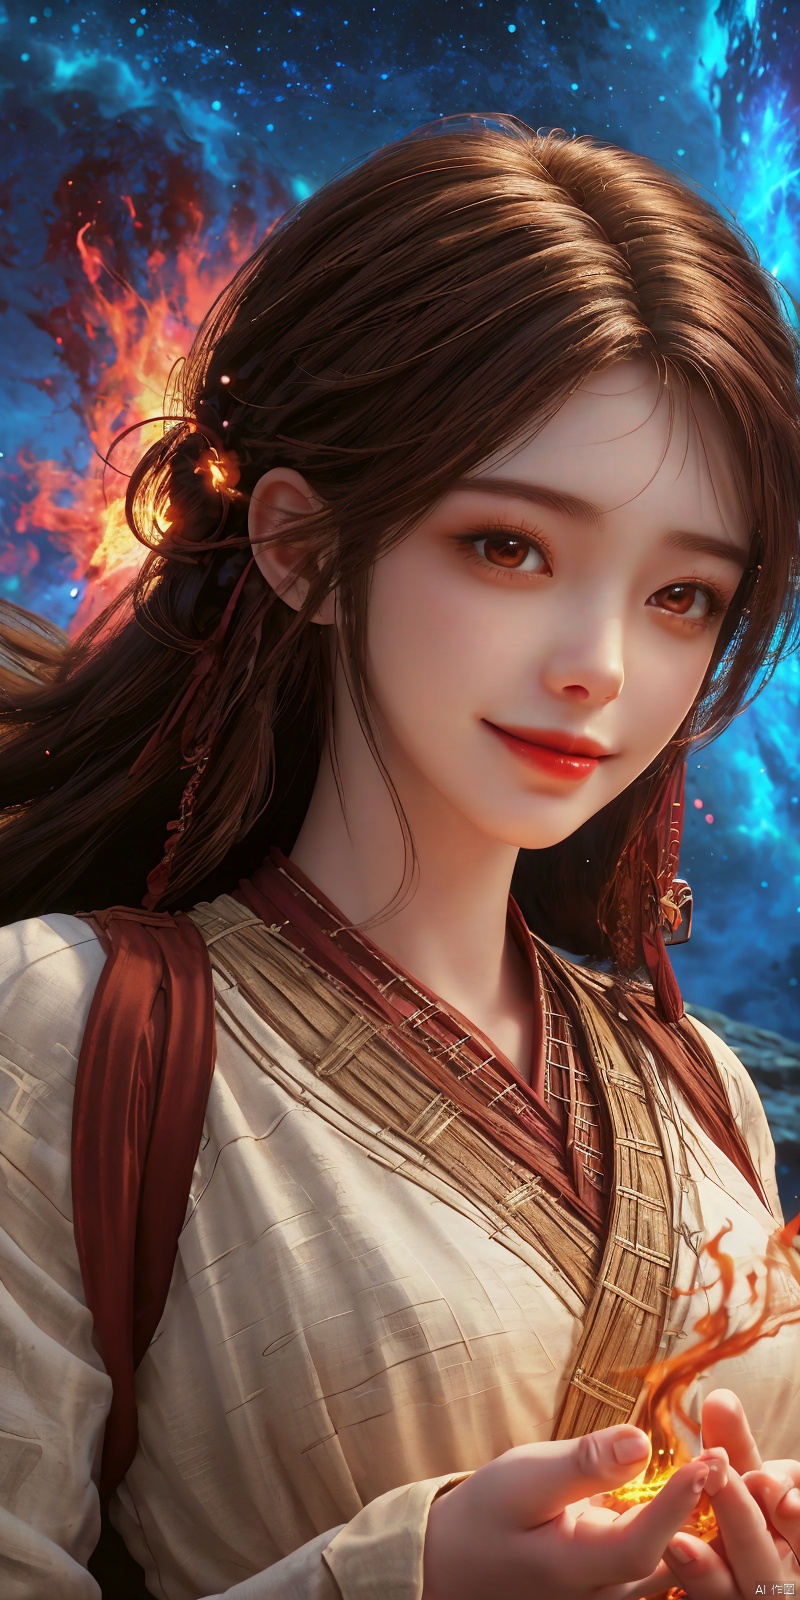  kind smile,looking_at_viewer,masterpiece, 1 girl, Look at me, Long hair, Flame, A magical scene, glowing, Floating hair, realistic, Nebula, An incredible picture, The magic array behind it, Stand, textured skin, super detail, best quality, , huolinger,dress, 1girl